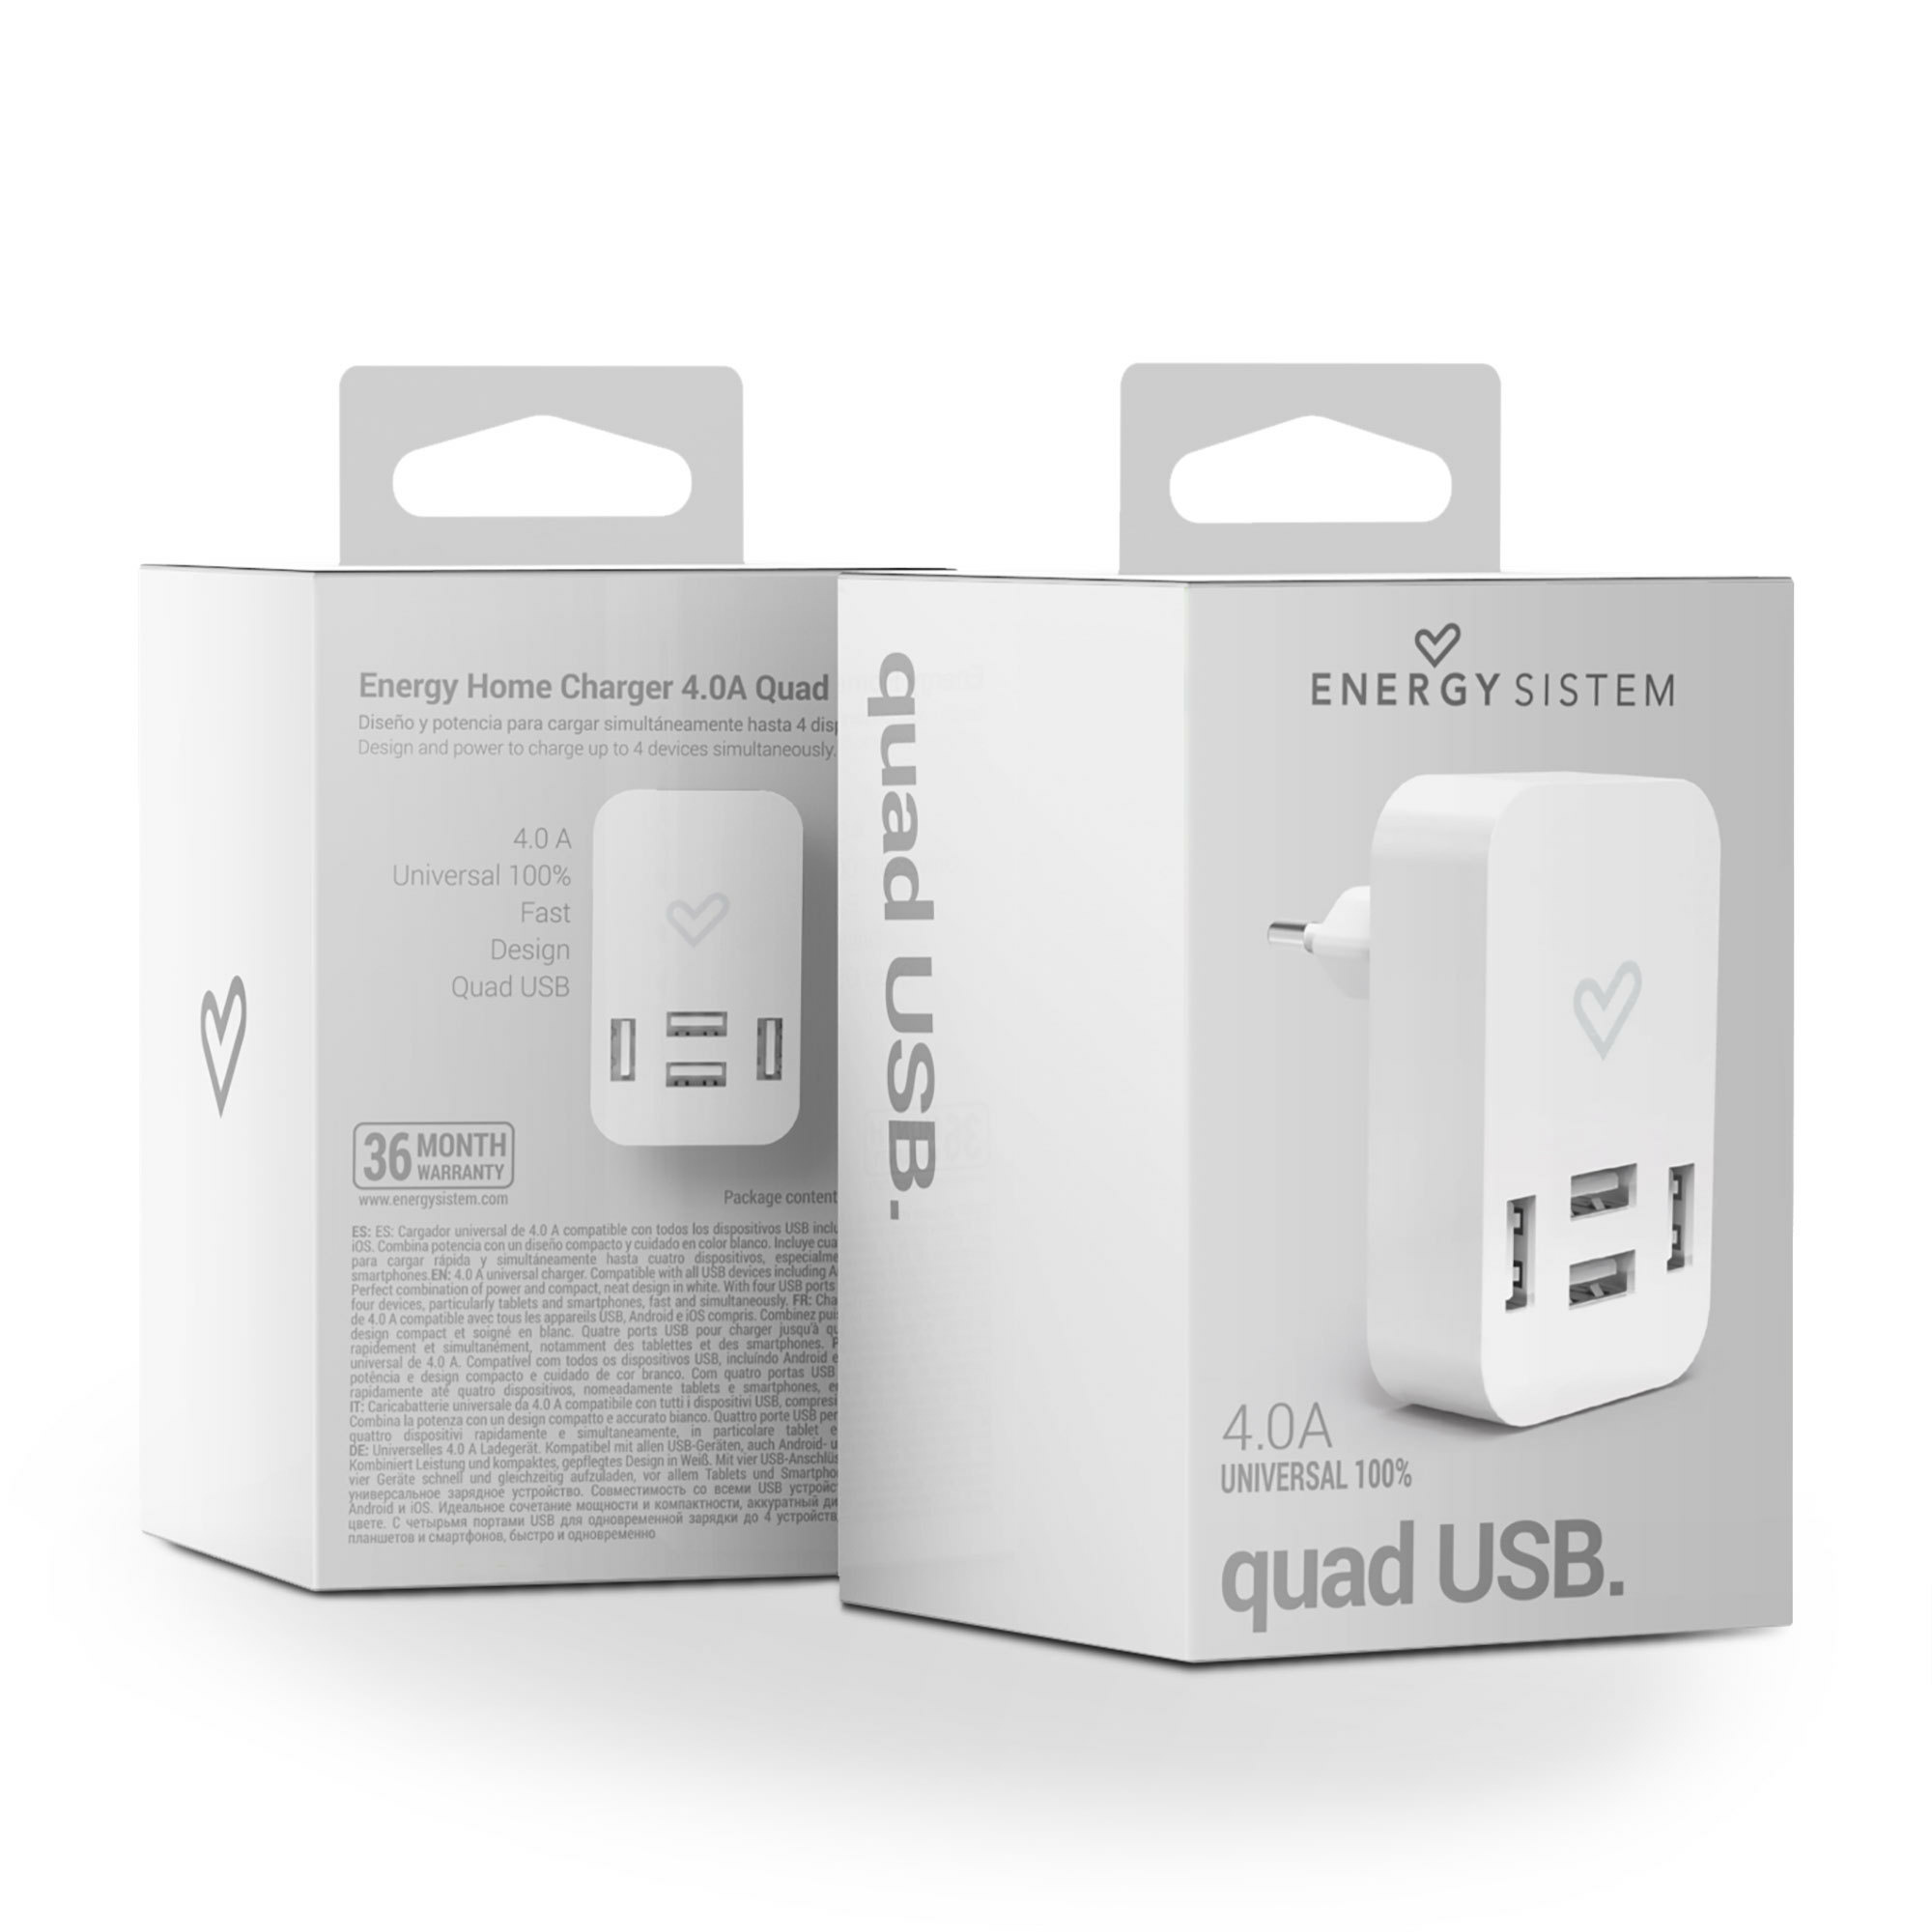 Packaging do Energy Home Charger 4.0A Quad USB